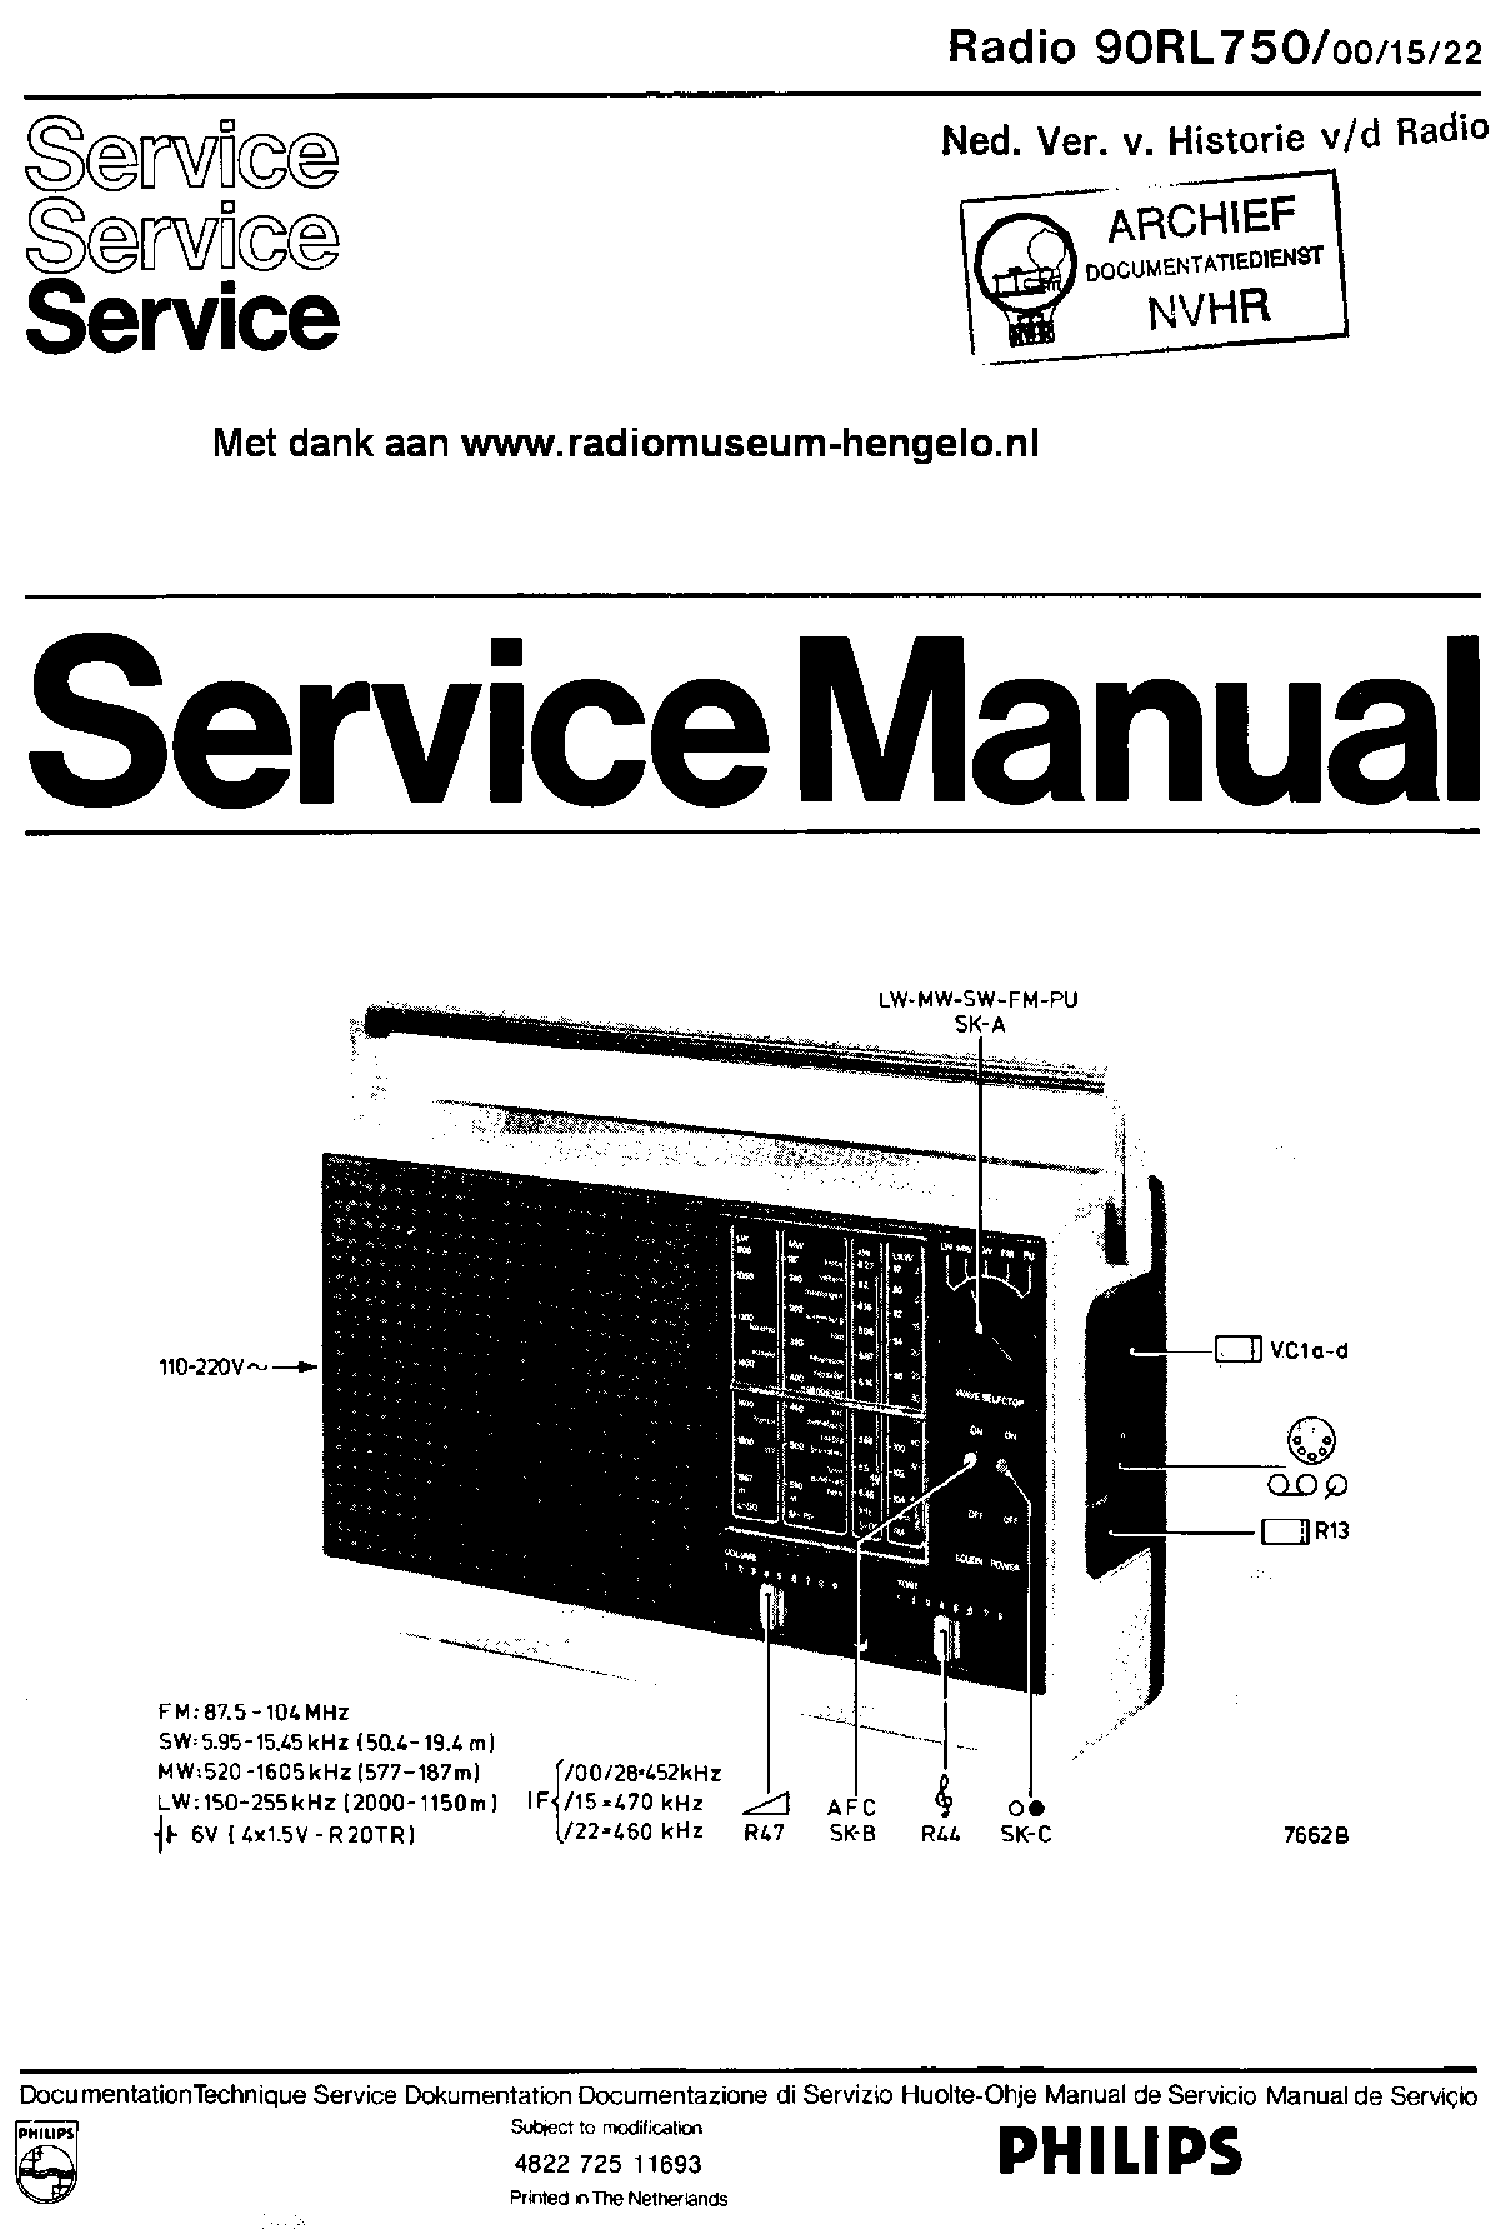 PHILIPS 90RL750-00-15-22 PORTABLE RECEIVER SM service manual (1st page)